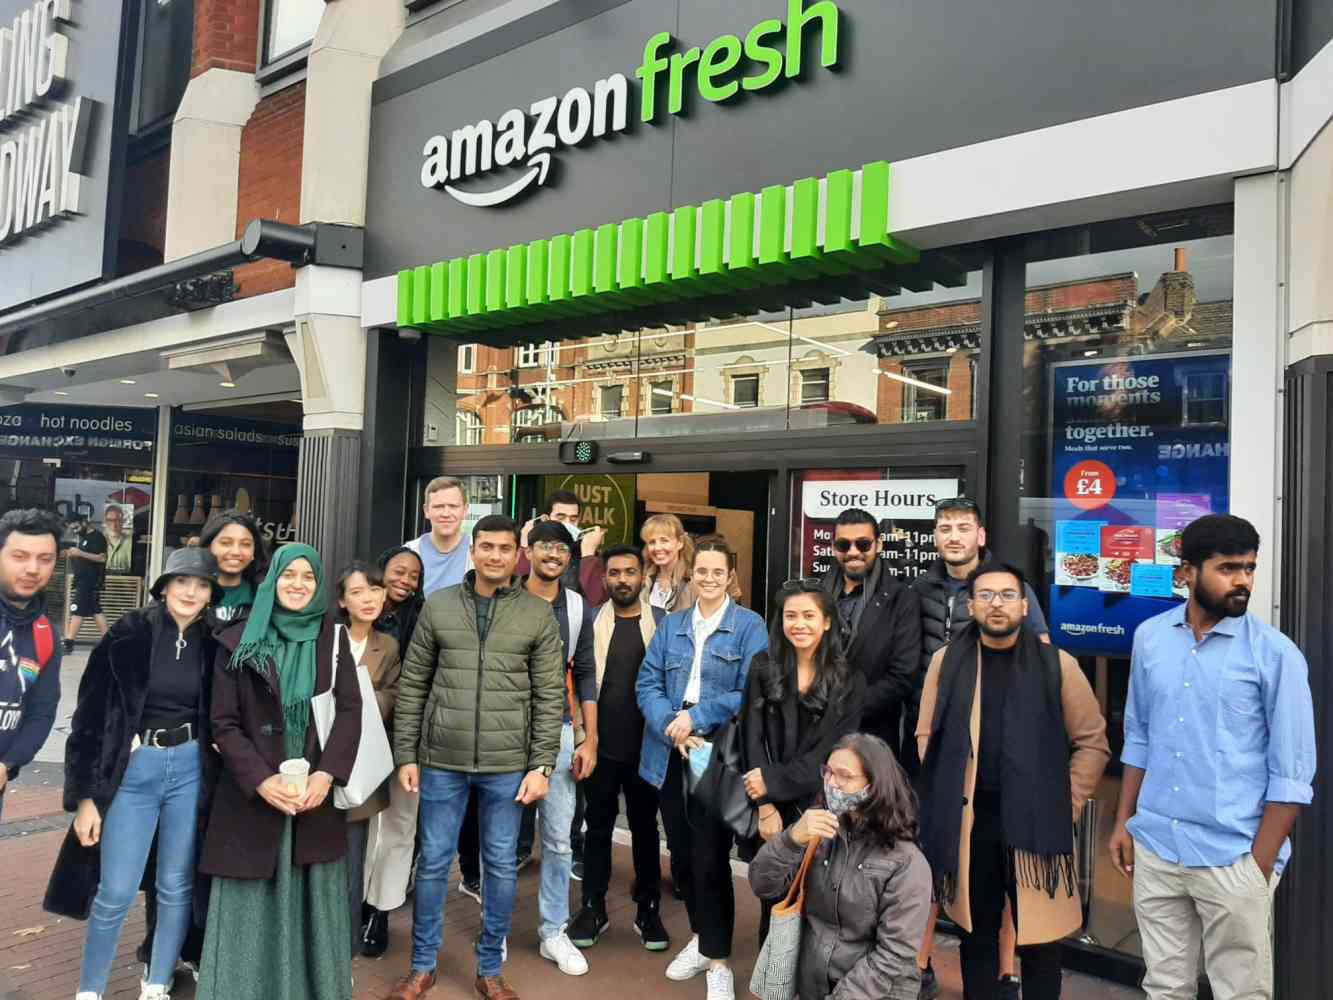 First Amazon Fresh Ealing London: Experiential visit